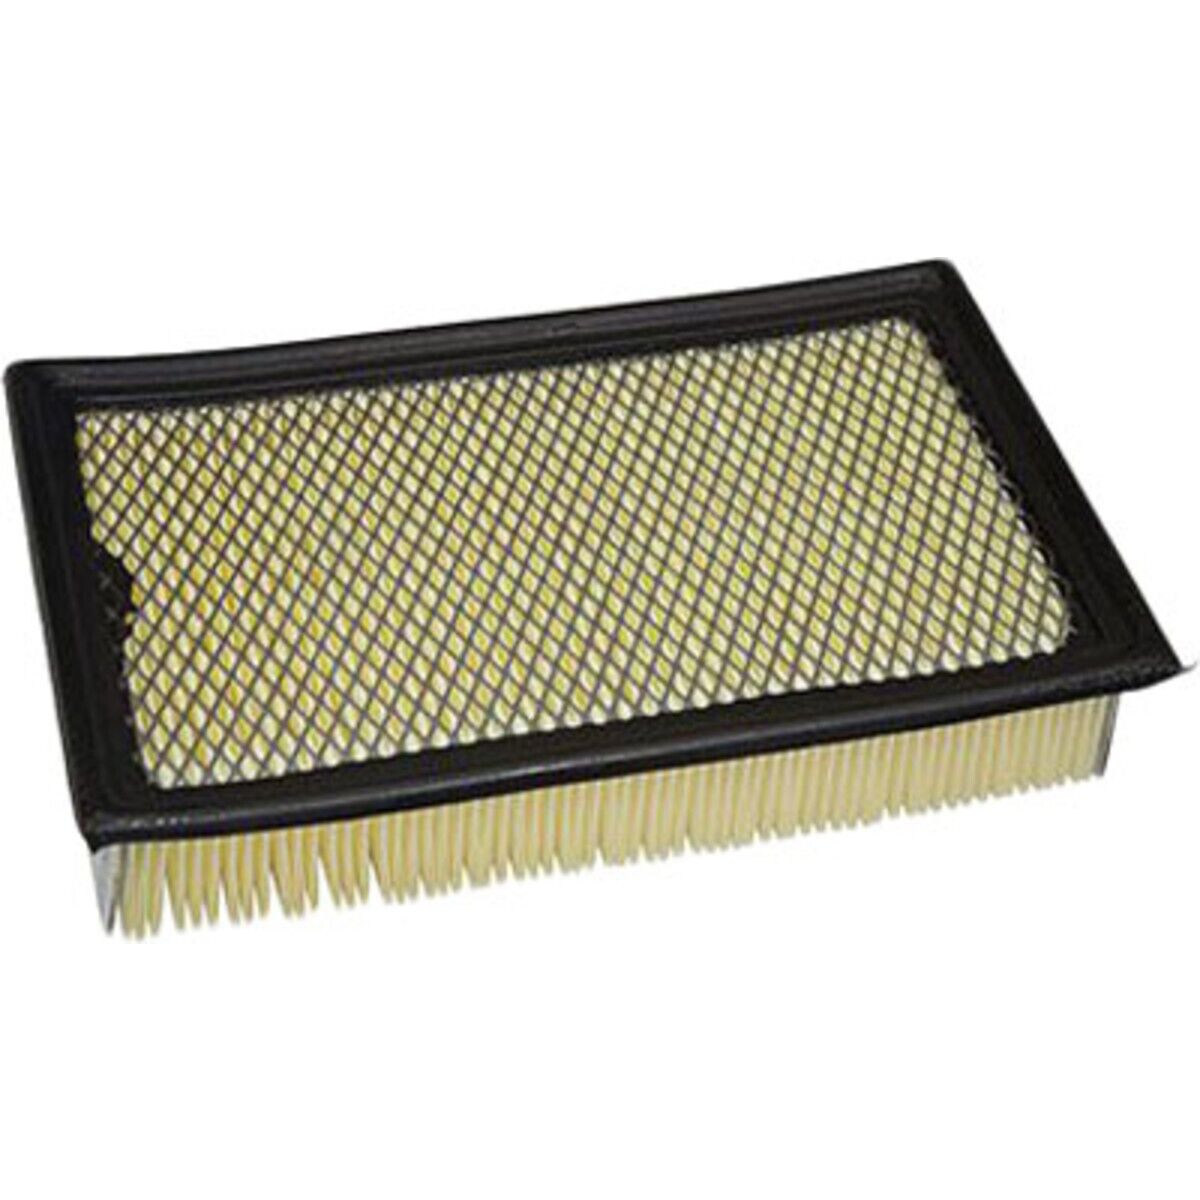 FA-1695 Motorcraft Air Filter for Explorer Ford Sport Trac Mercury Mountaineer